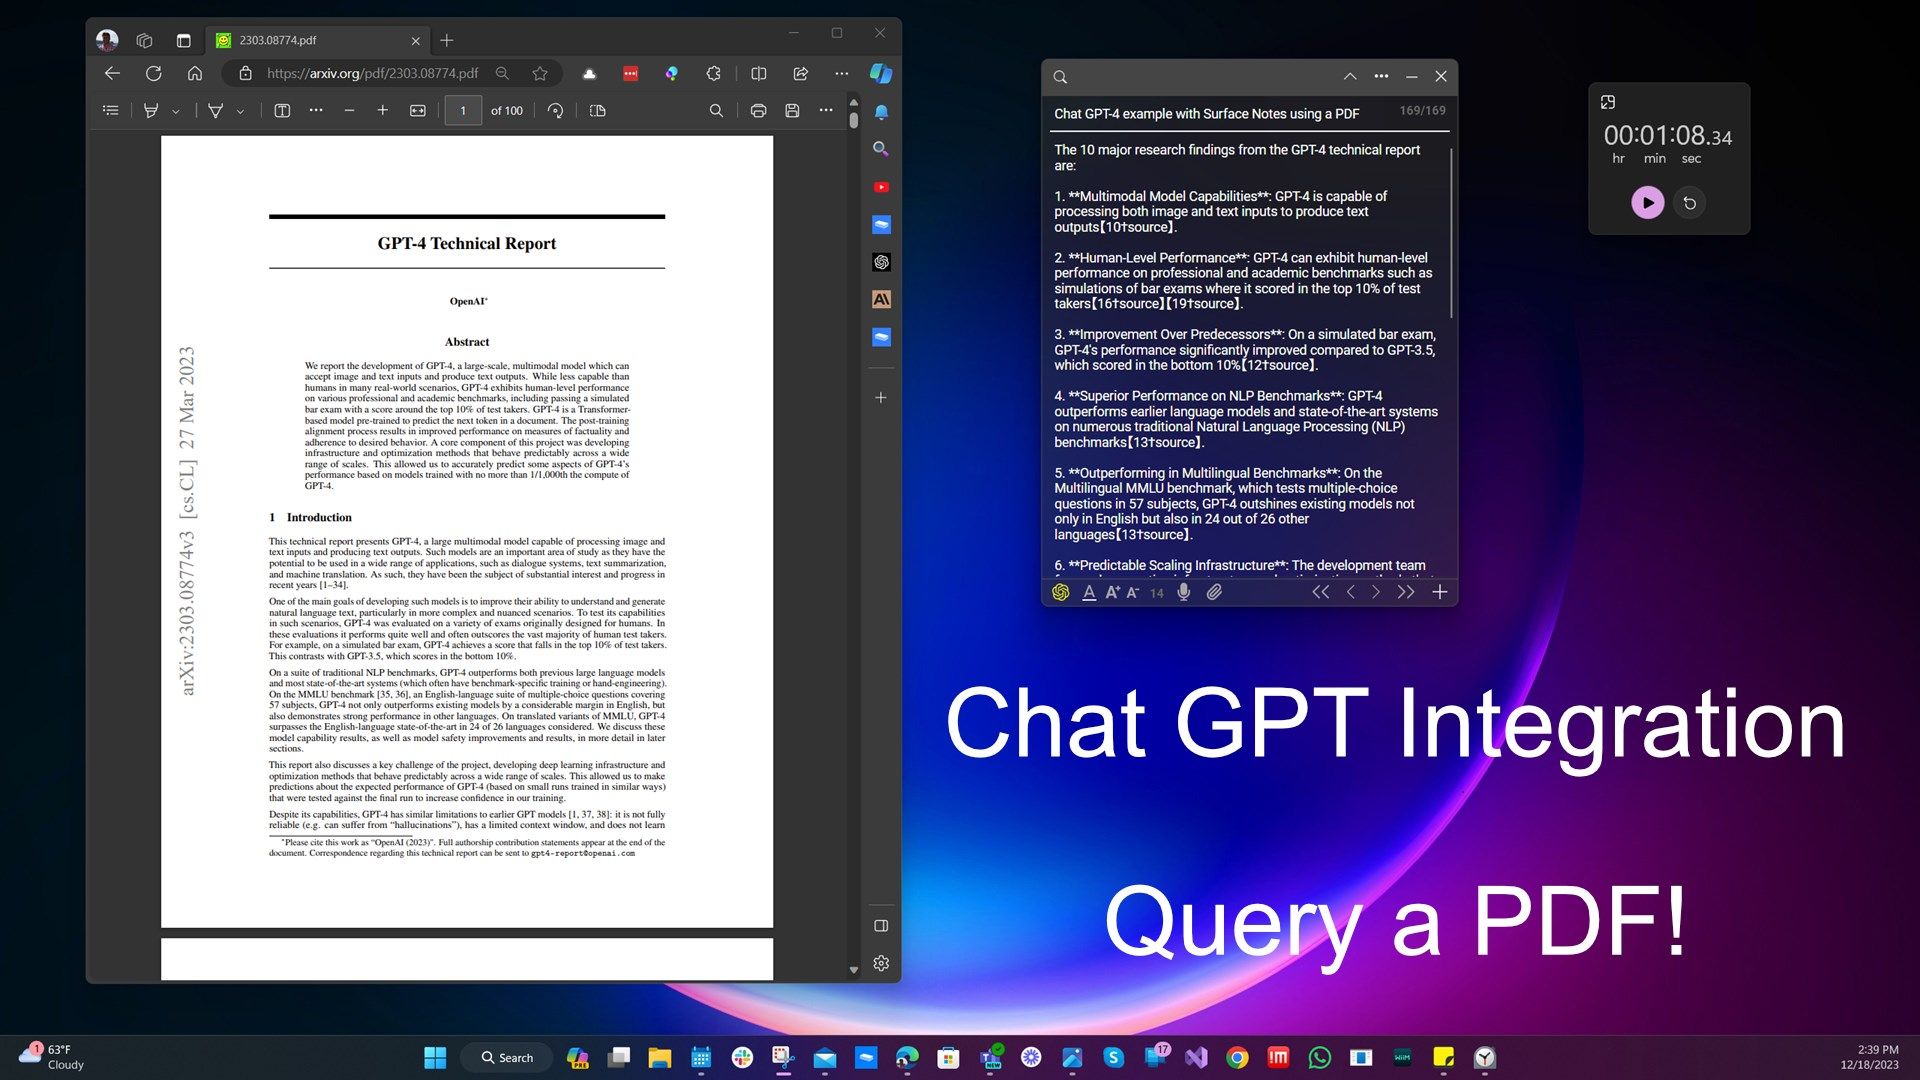 With Chat GPT and Files Support you can Query a document like a PDF!